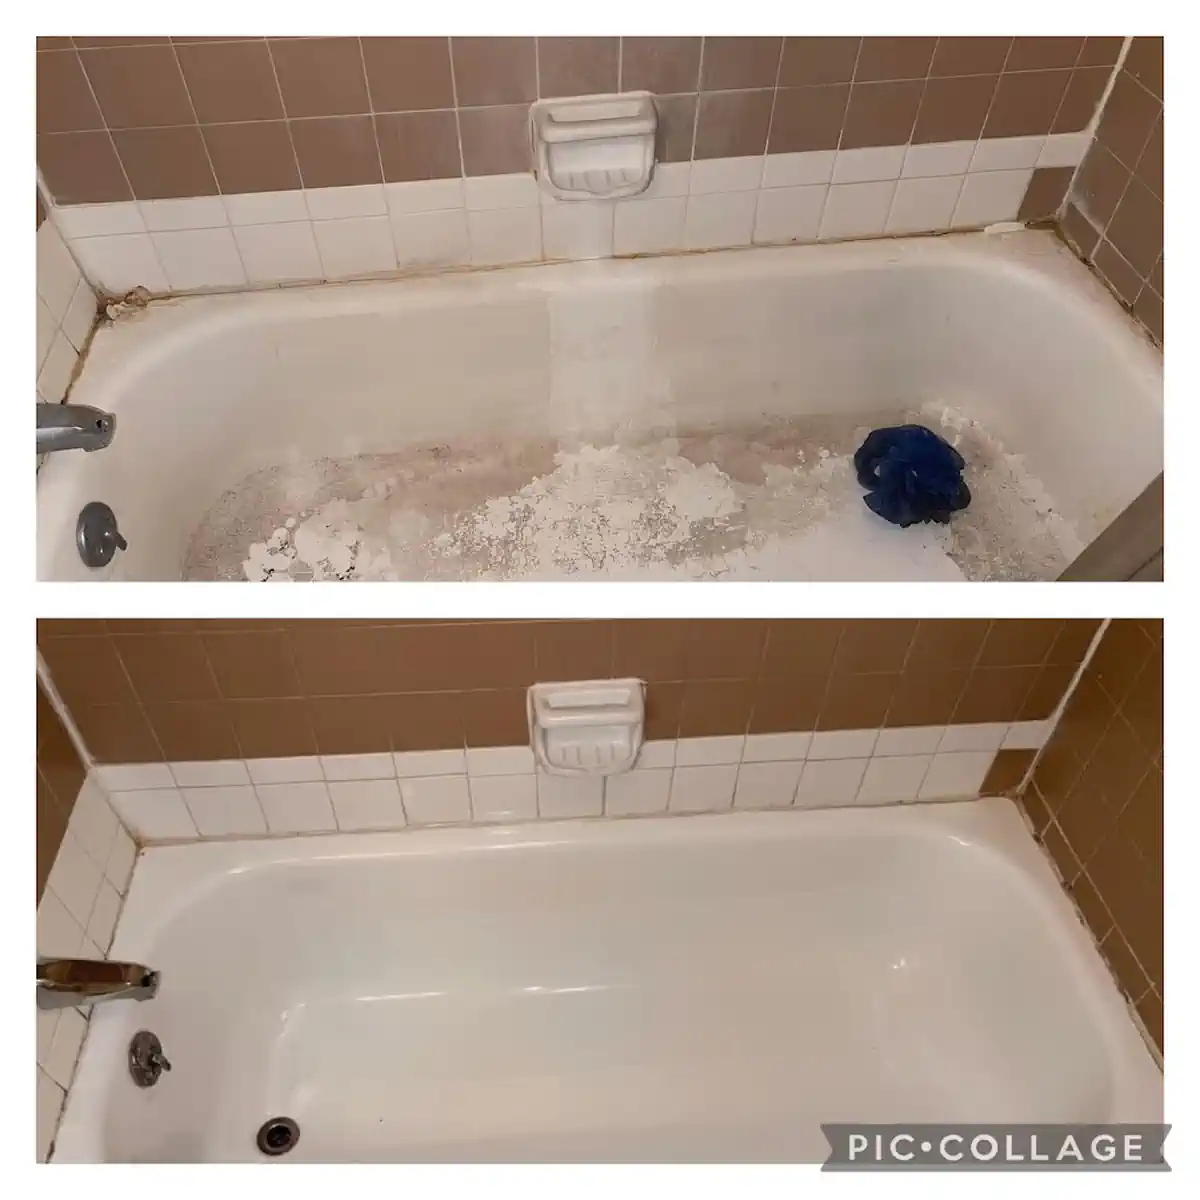 Clean bathtub 2 - before and after